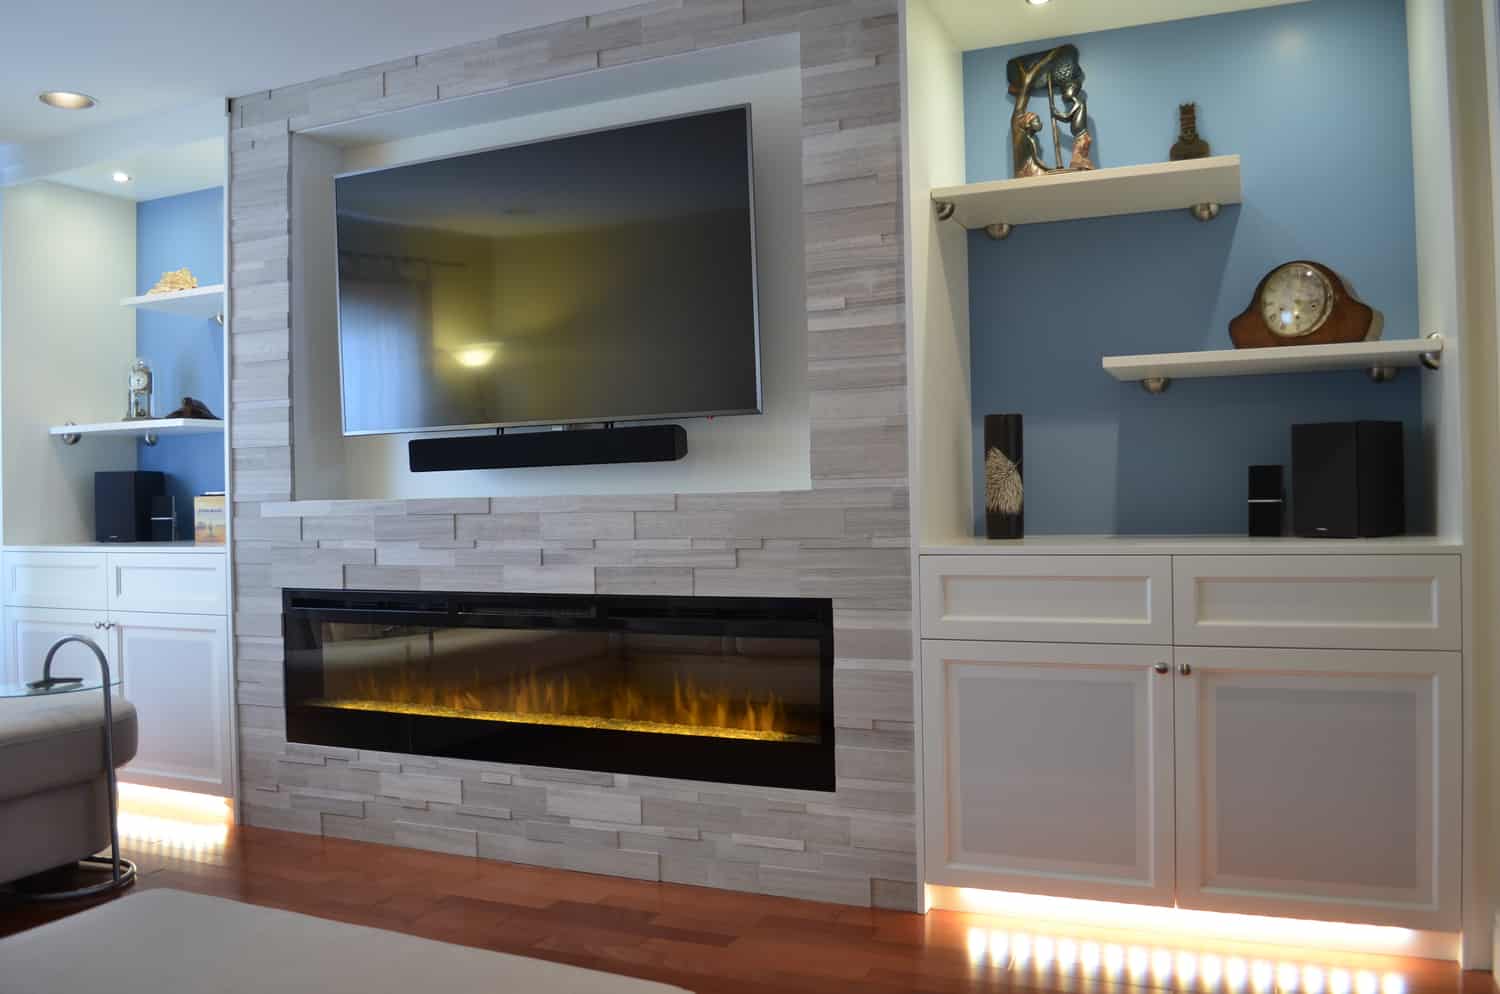 Custom Wall Unit with TV and fireplace